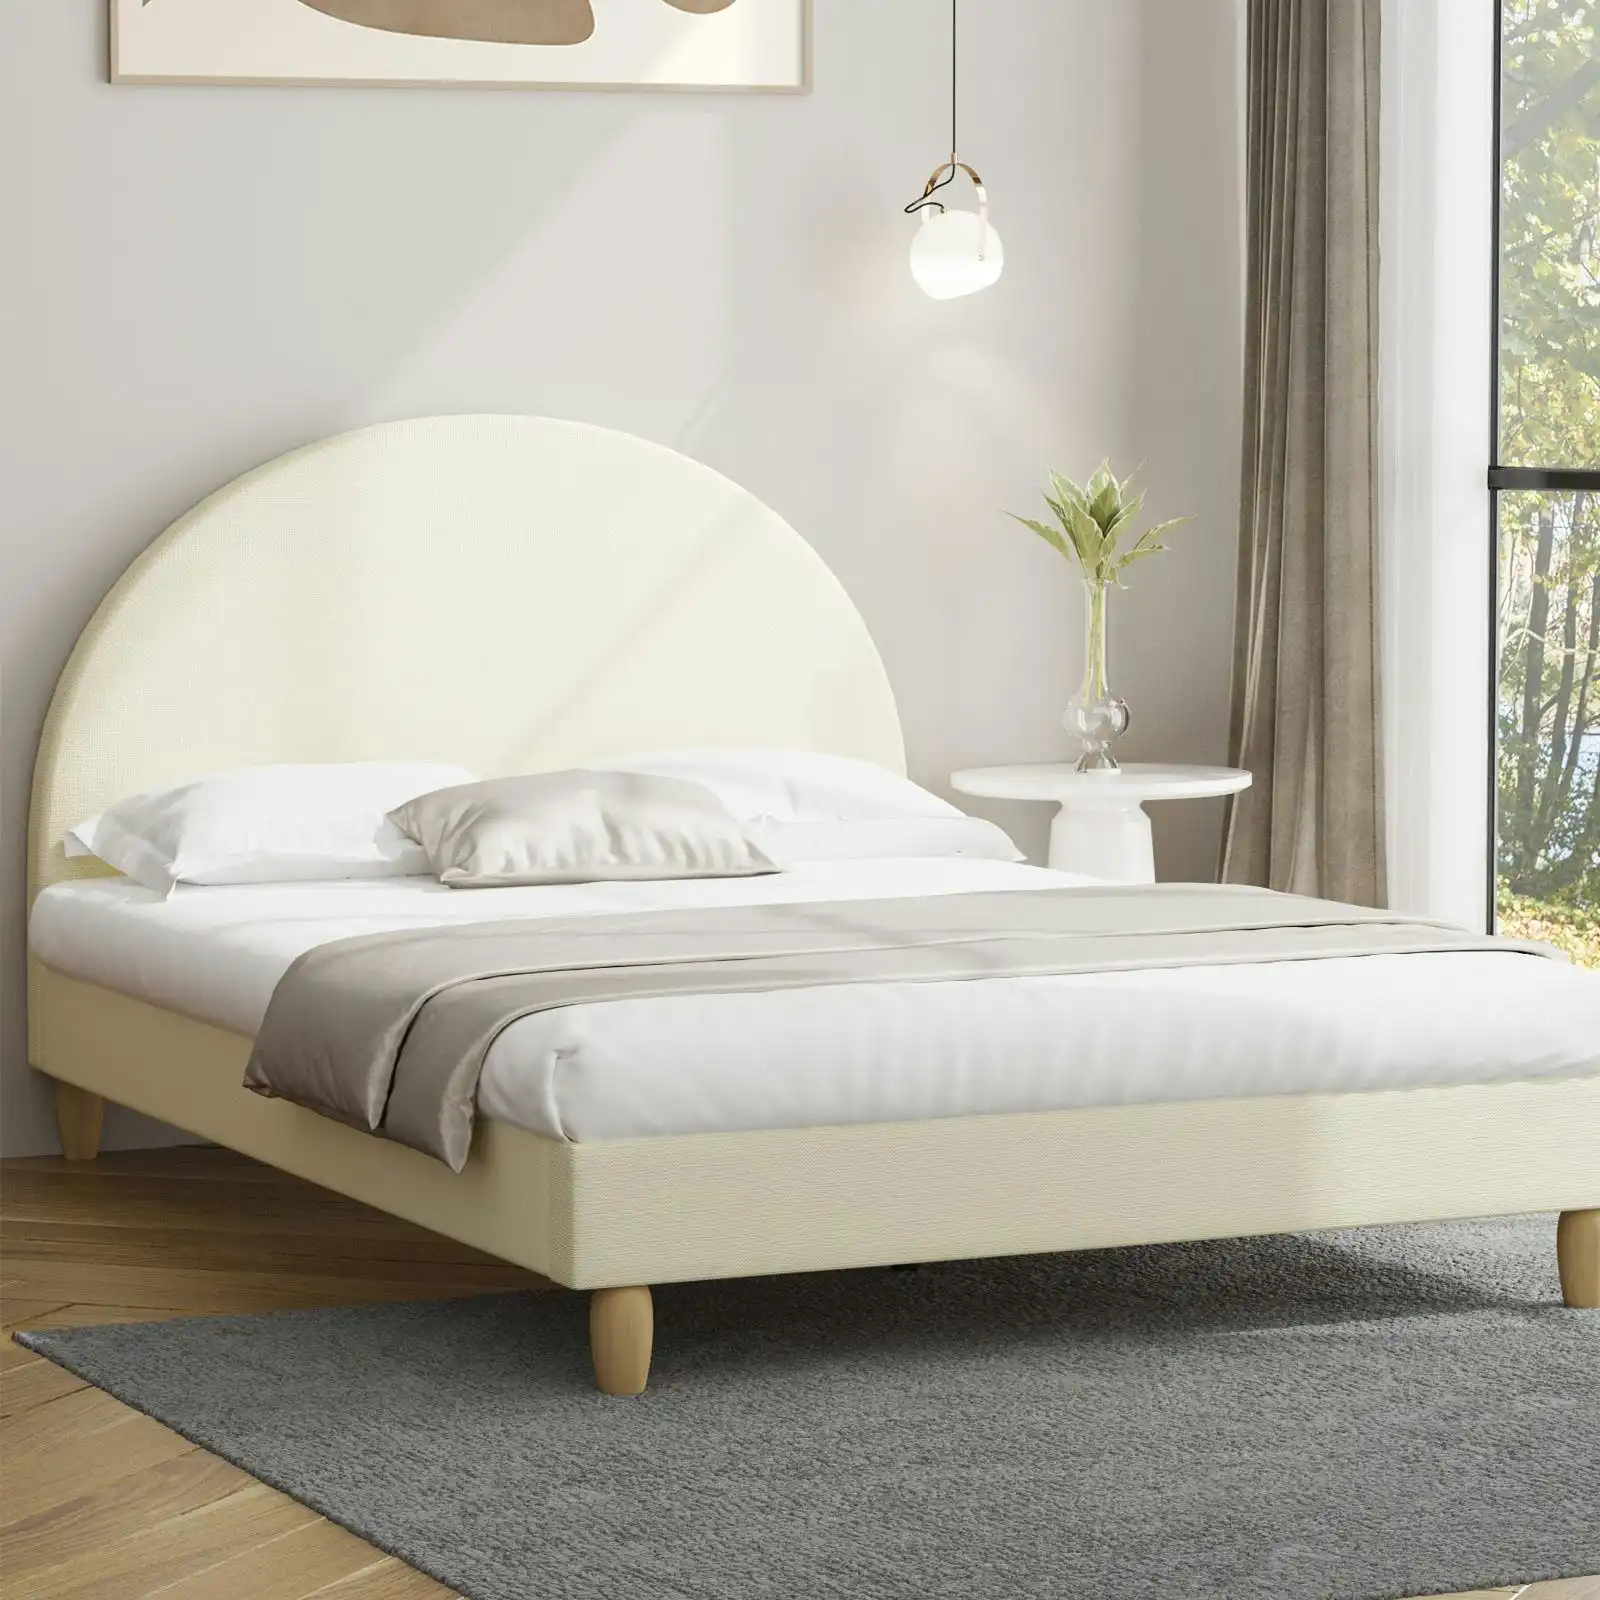 Oikiture Bed Frame Queen Size Beige Fabric Arched Beds Platform